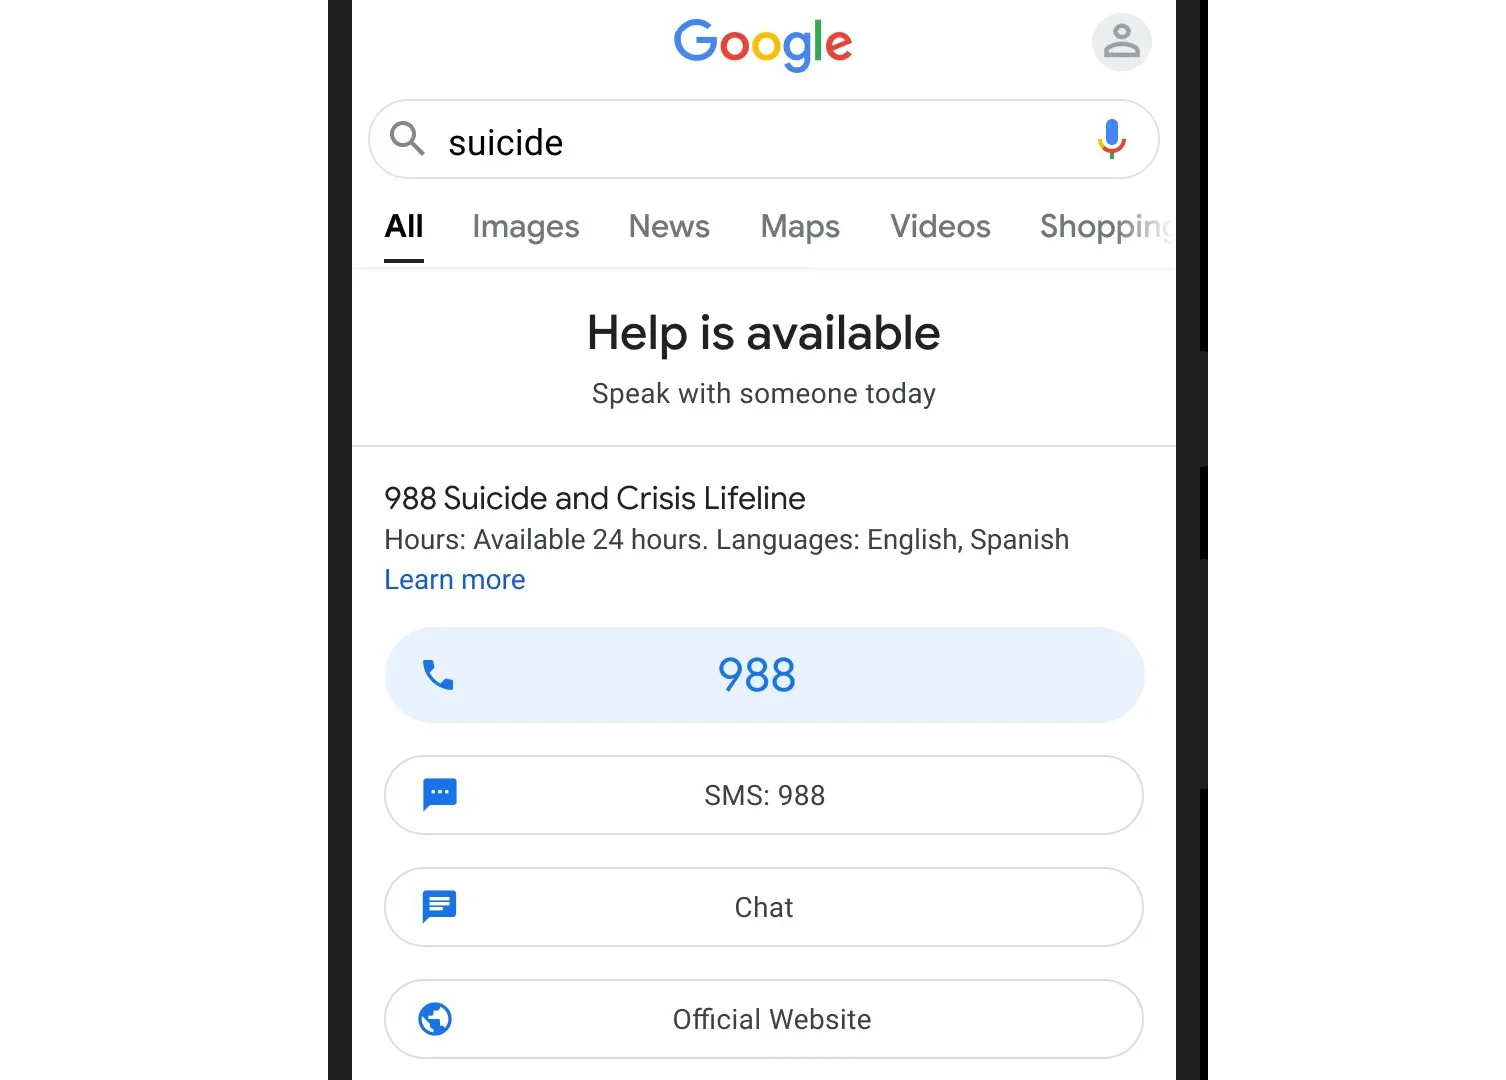 Google search page showing suicide and crisis lifeline results for the query 